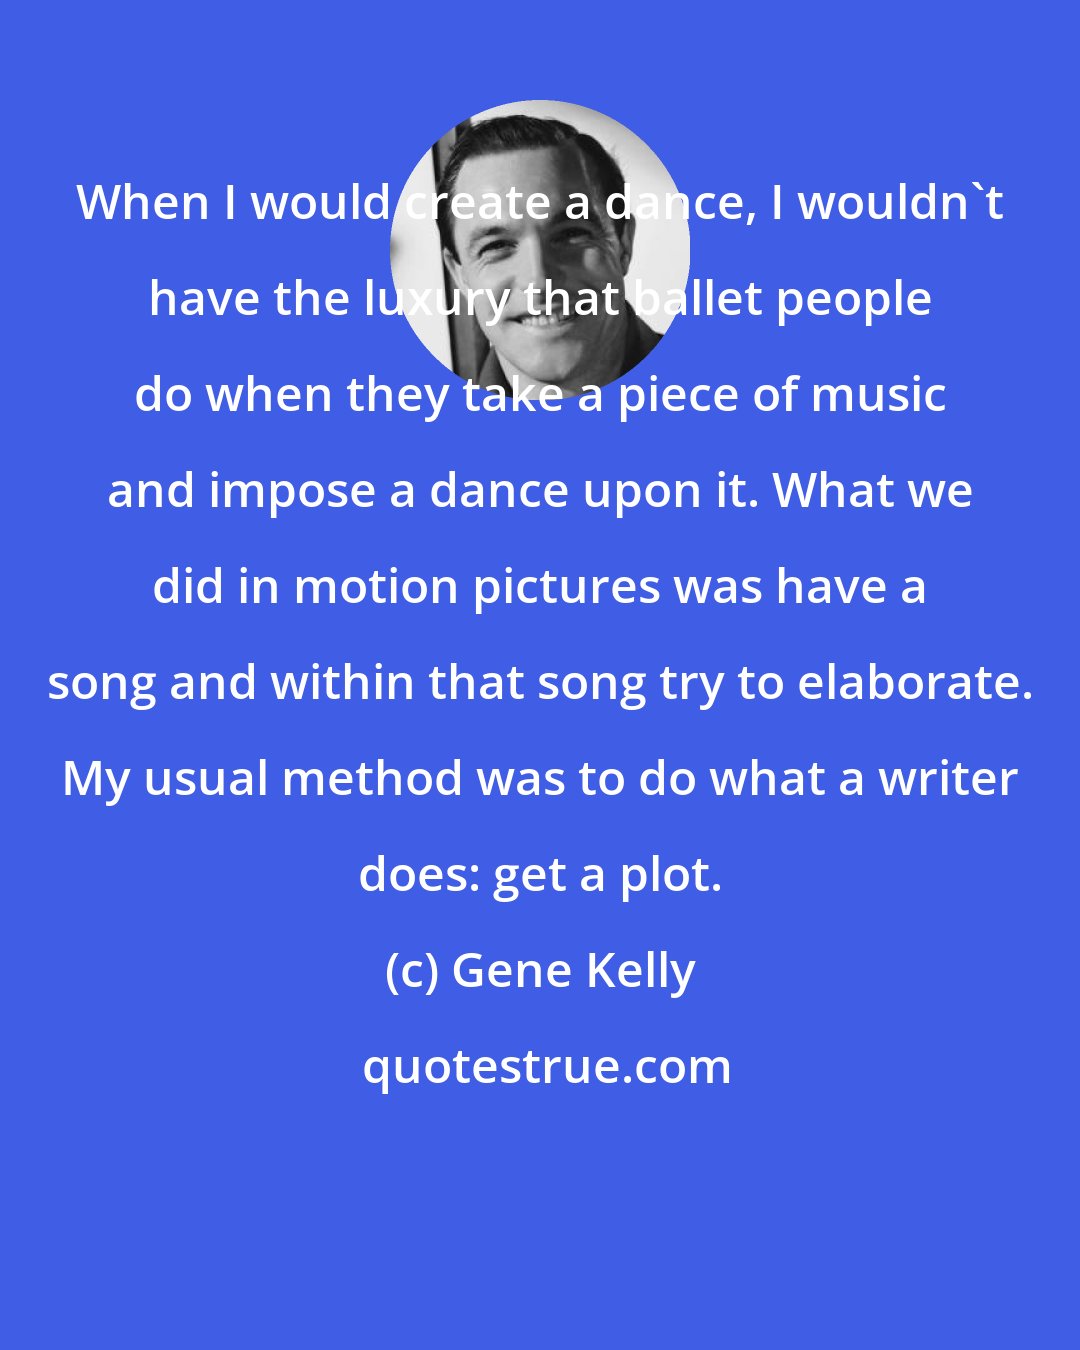 Gene Kelly: When I would create a dance, I wouldn't have the luxury that ballet people do when they take a piece of music and impose a dance upon it. What we did in motion pictures was have a song and within that song try to elaborate. My usual method was to do what a writer does: get a plot.